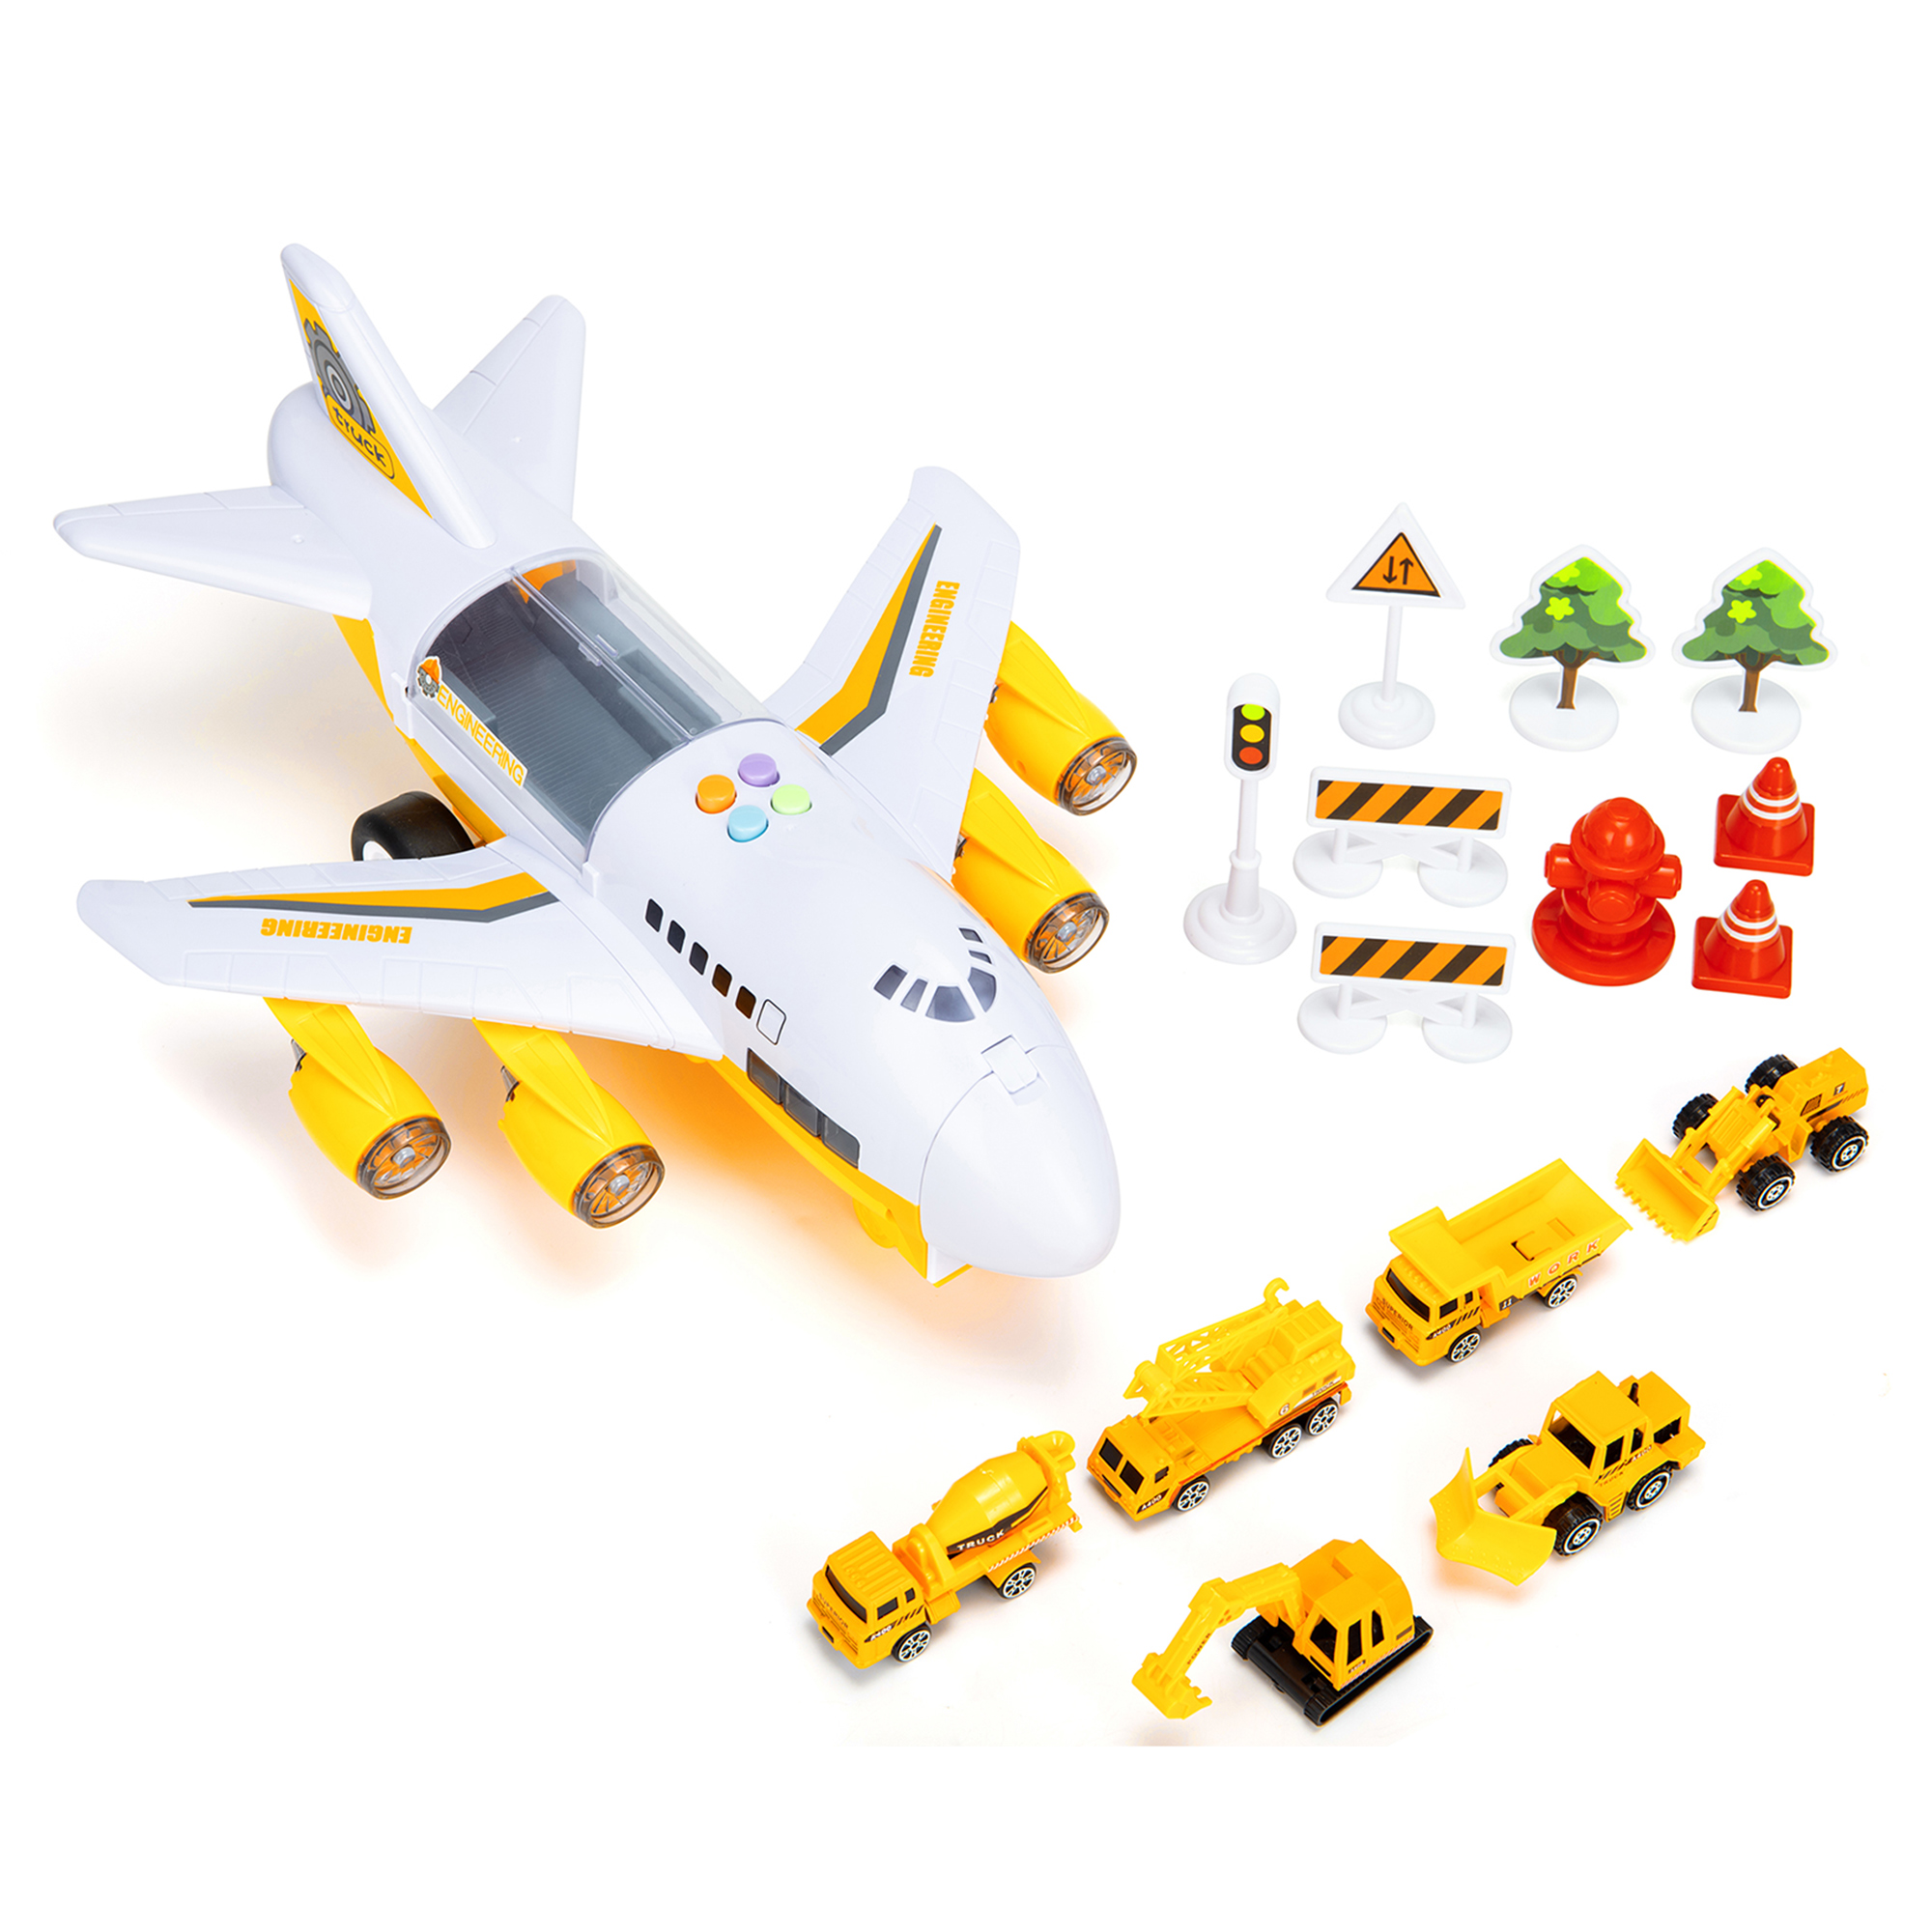 SHCKE Police Car Toys Set with Transport Cargo Airplane Educational Vehicles Toy Car Set for 2 3 4 5 Years Old Boys Kids Child with Large Play Mat 6 Police Cars Large Plane and 11 Road Signs - image 2 of 4